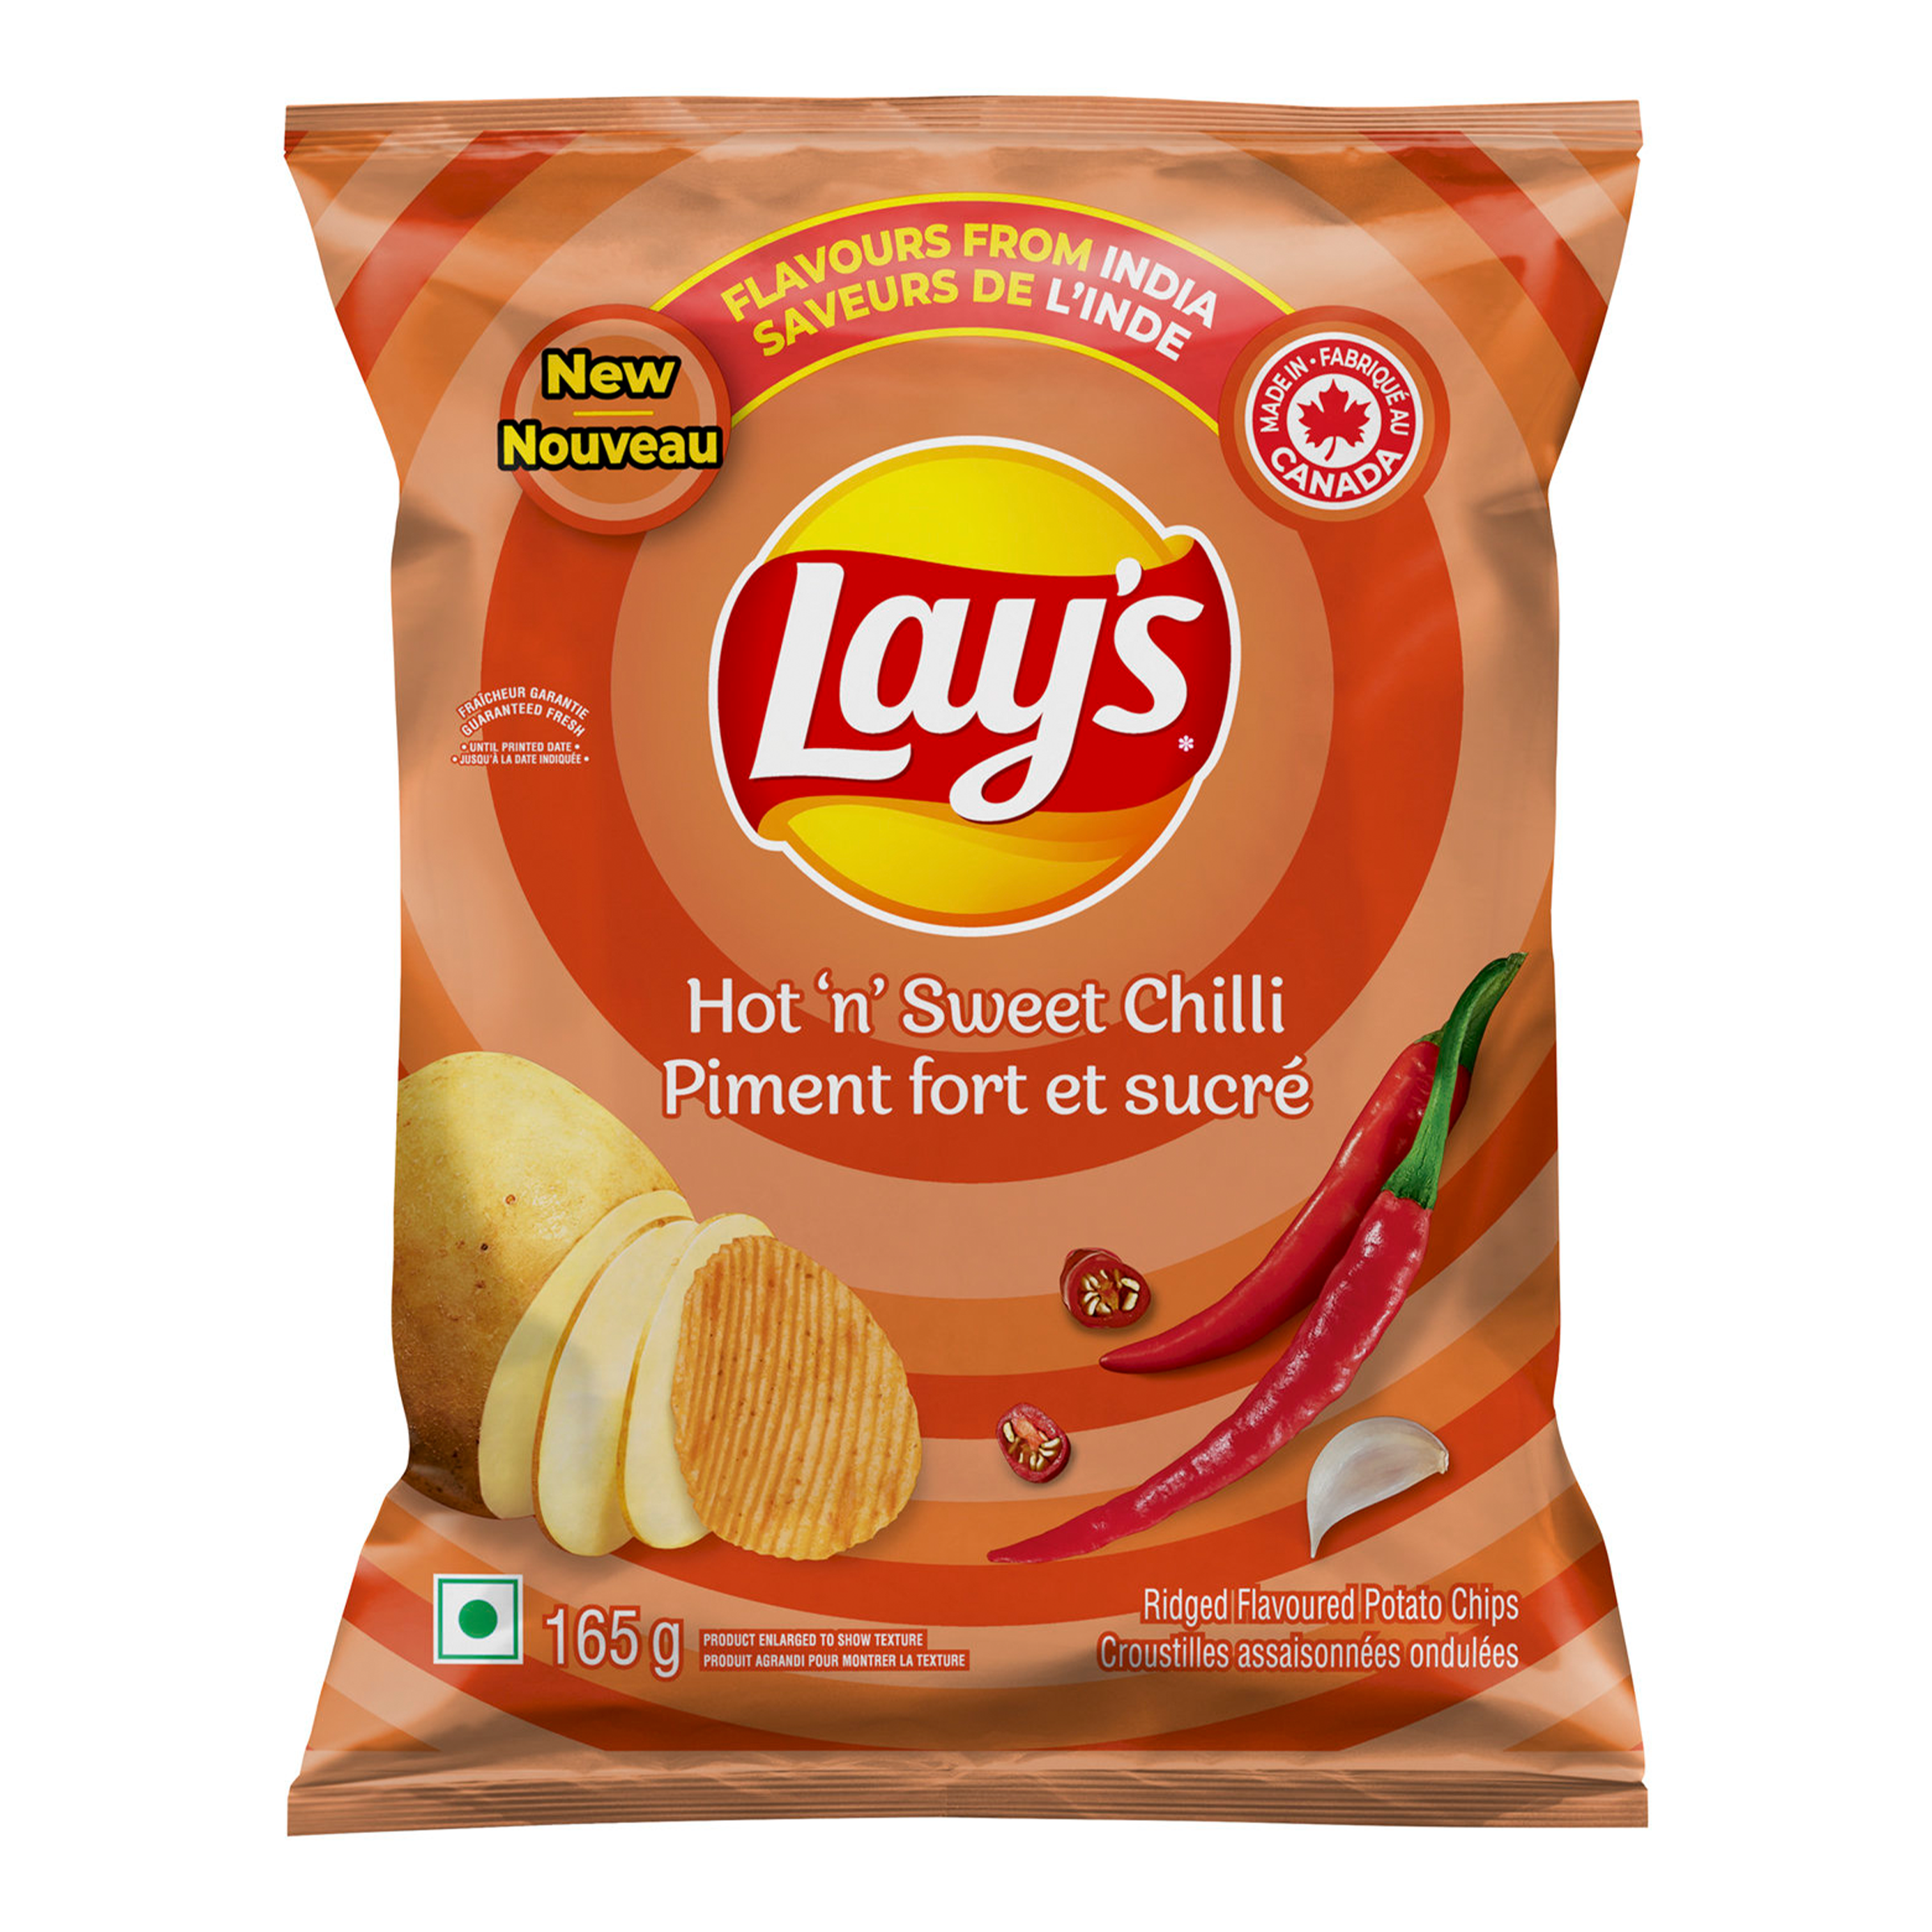 Lays - India's Hot 'n' Sweet Chilli